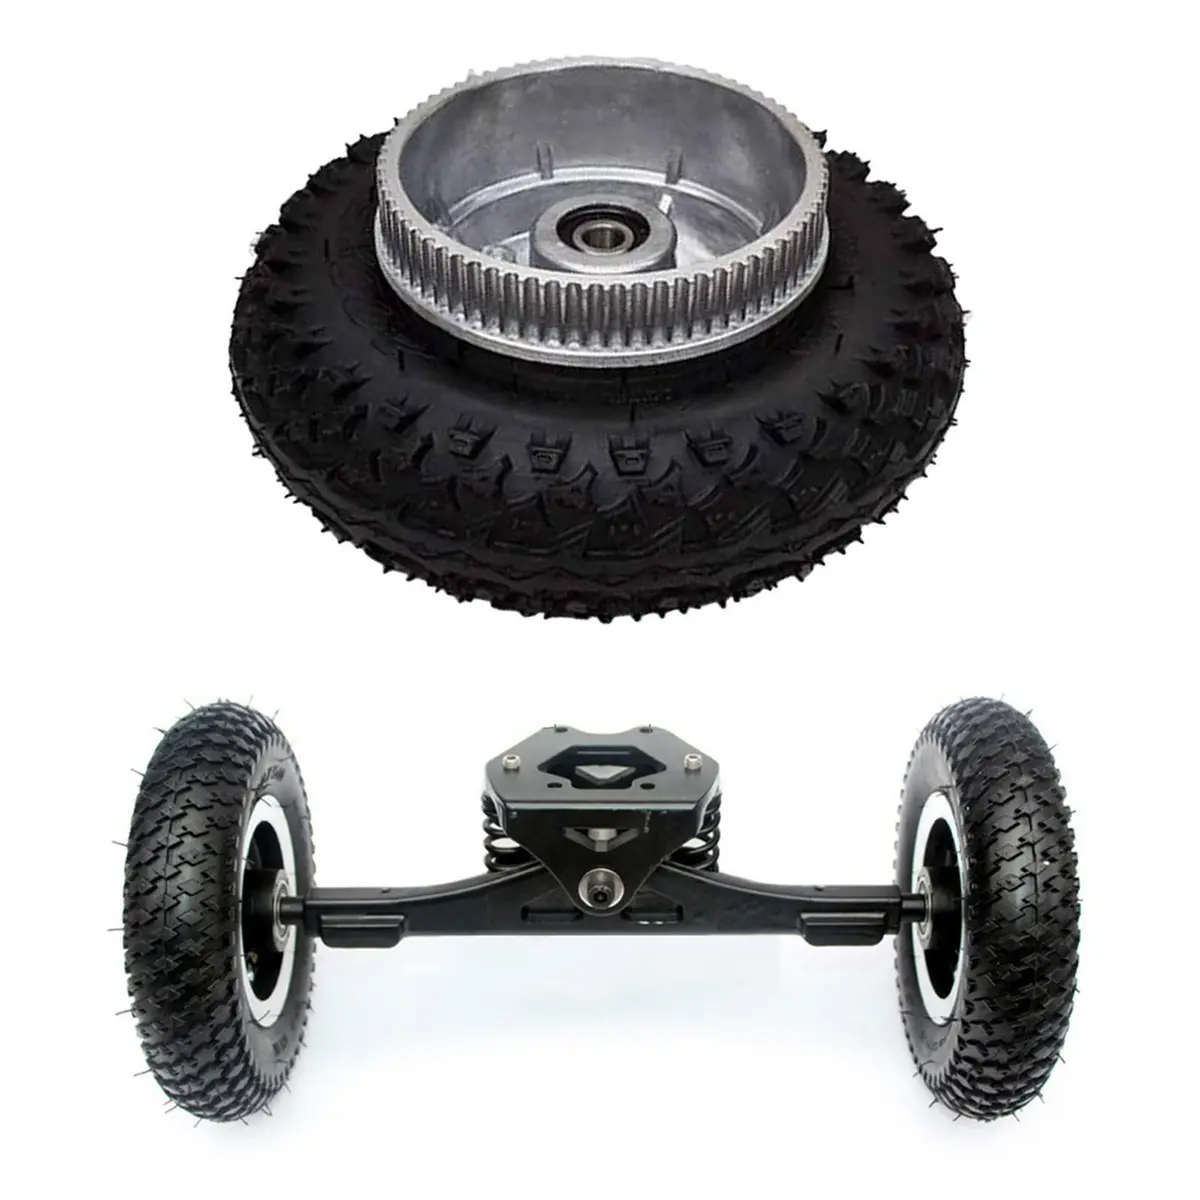 What Size Pulley For An Electric Skateboard